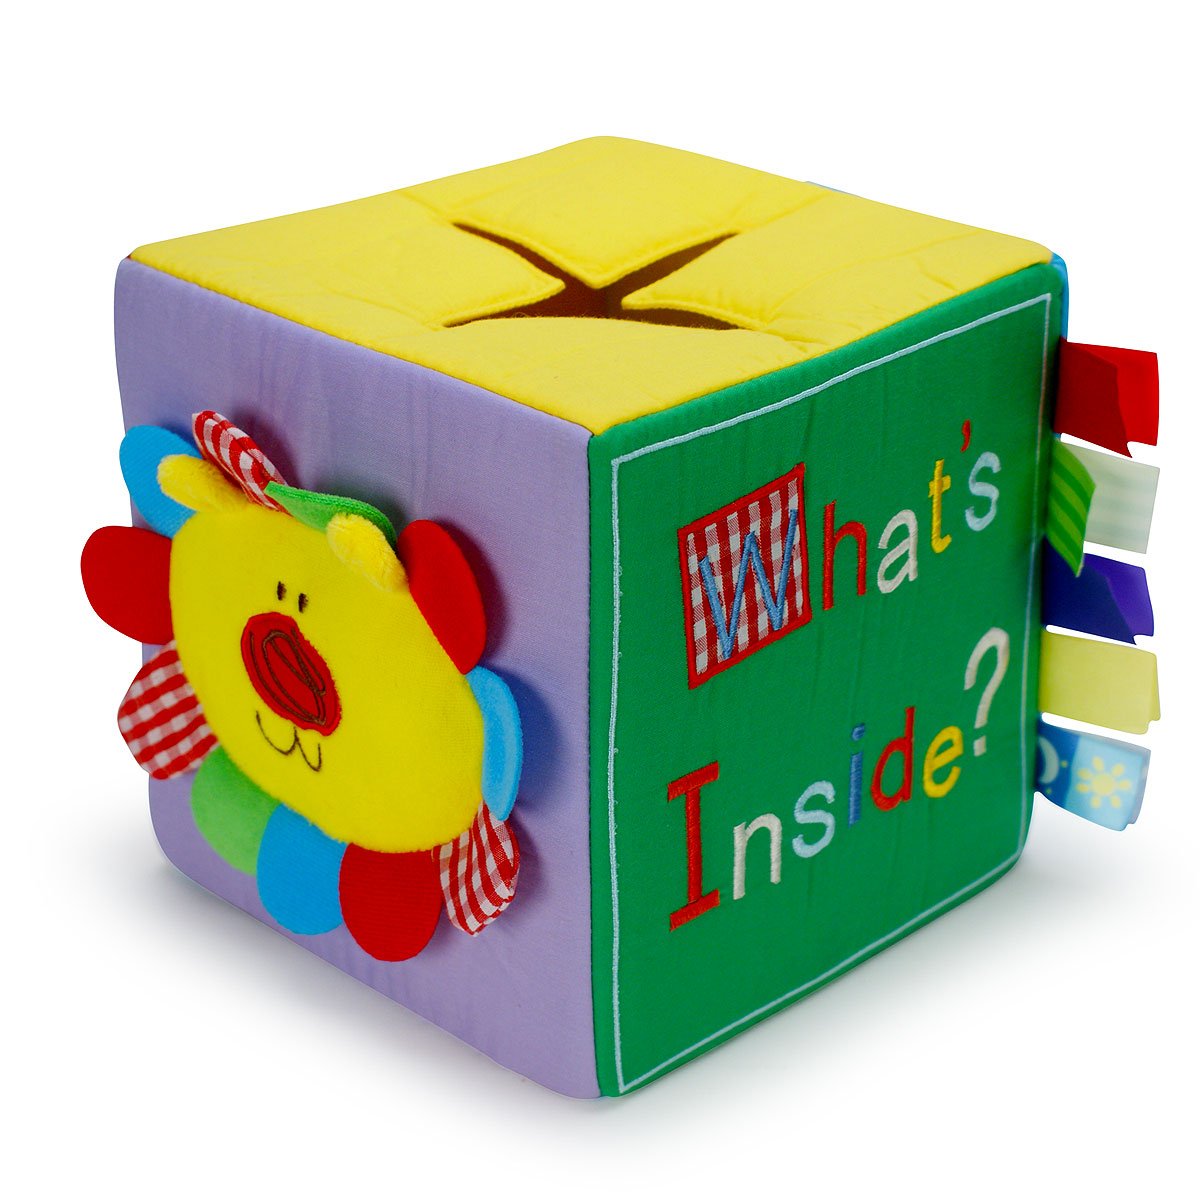 Genius Baby Toys | The Original Surprise What's Inside Toy Box and Playset, Hand Embroidered with 8 ct Plush Toys for Infants and Toddlers, 7" Square Cube